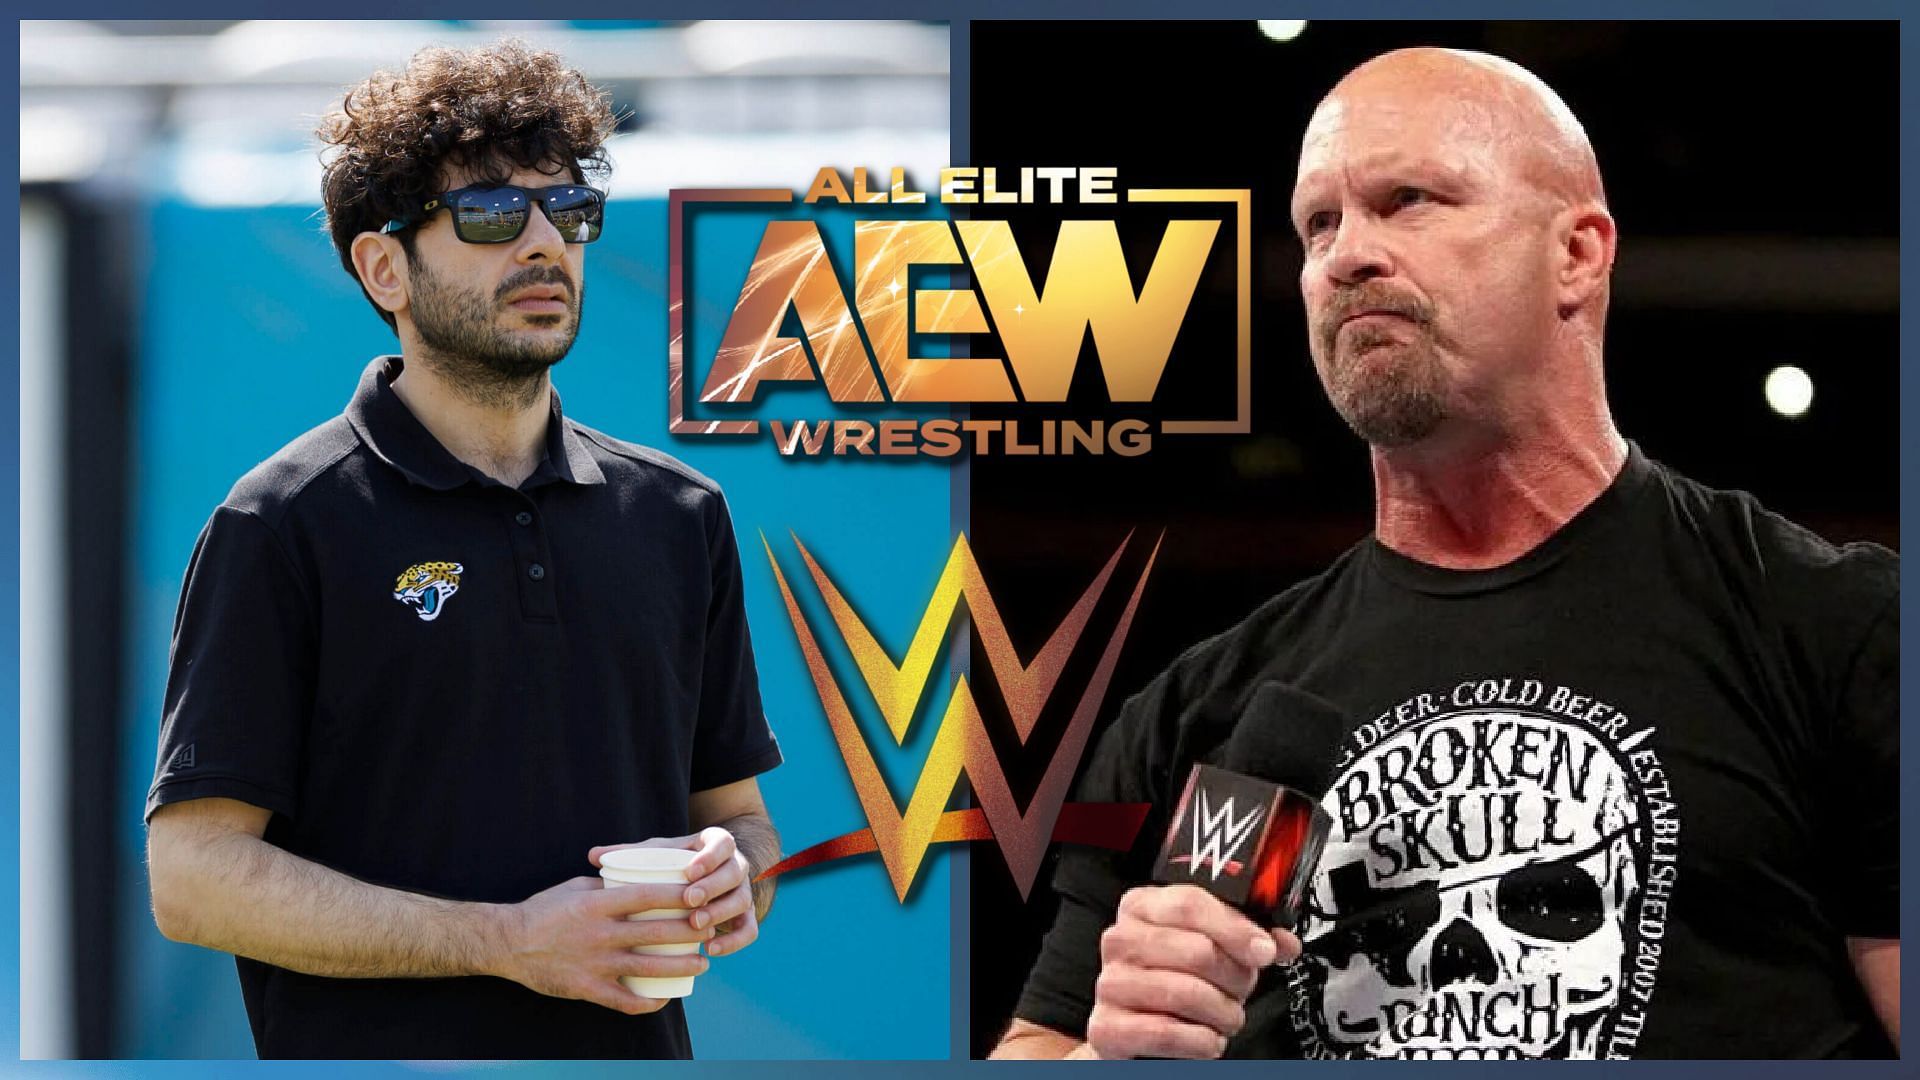 WWE veteran thinks Tony Khan is looking to book popular AEW star as the next Stone Cold Steve Austin